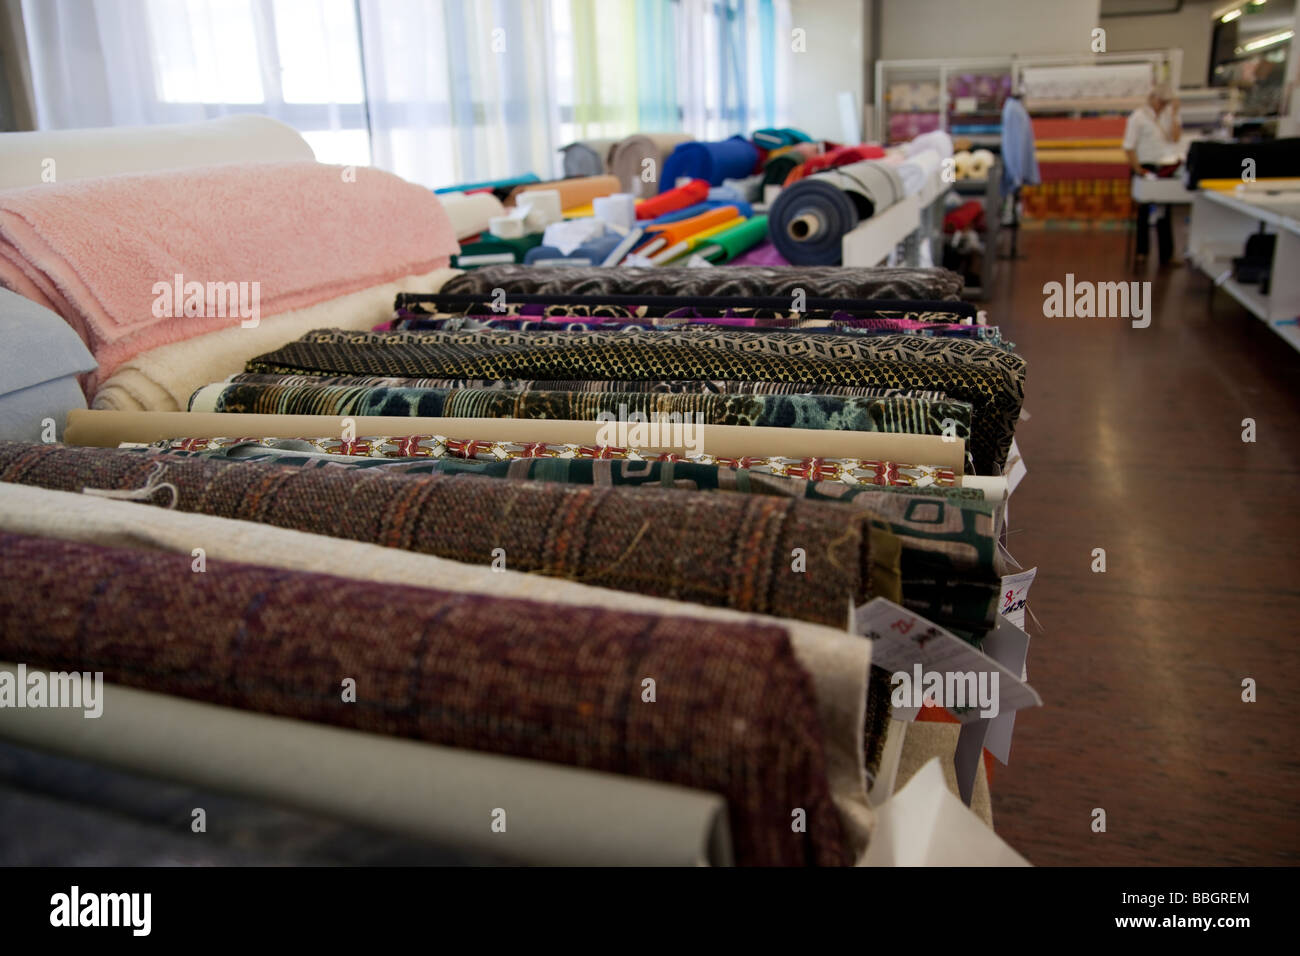 Bolts, rolls of fabric at a fabric store. Charles Lupica Stock Photo